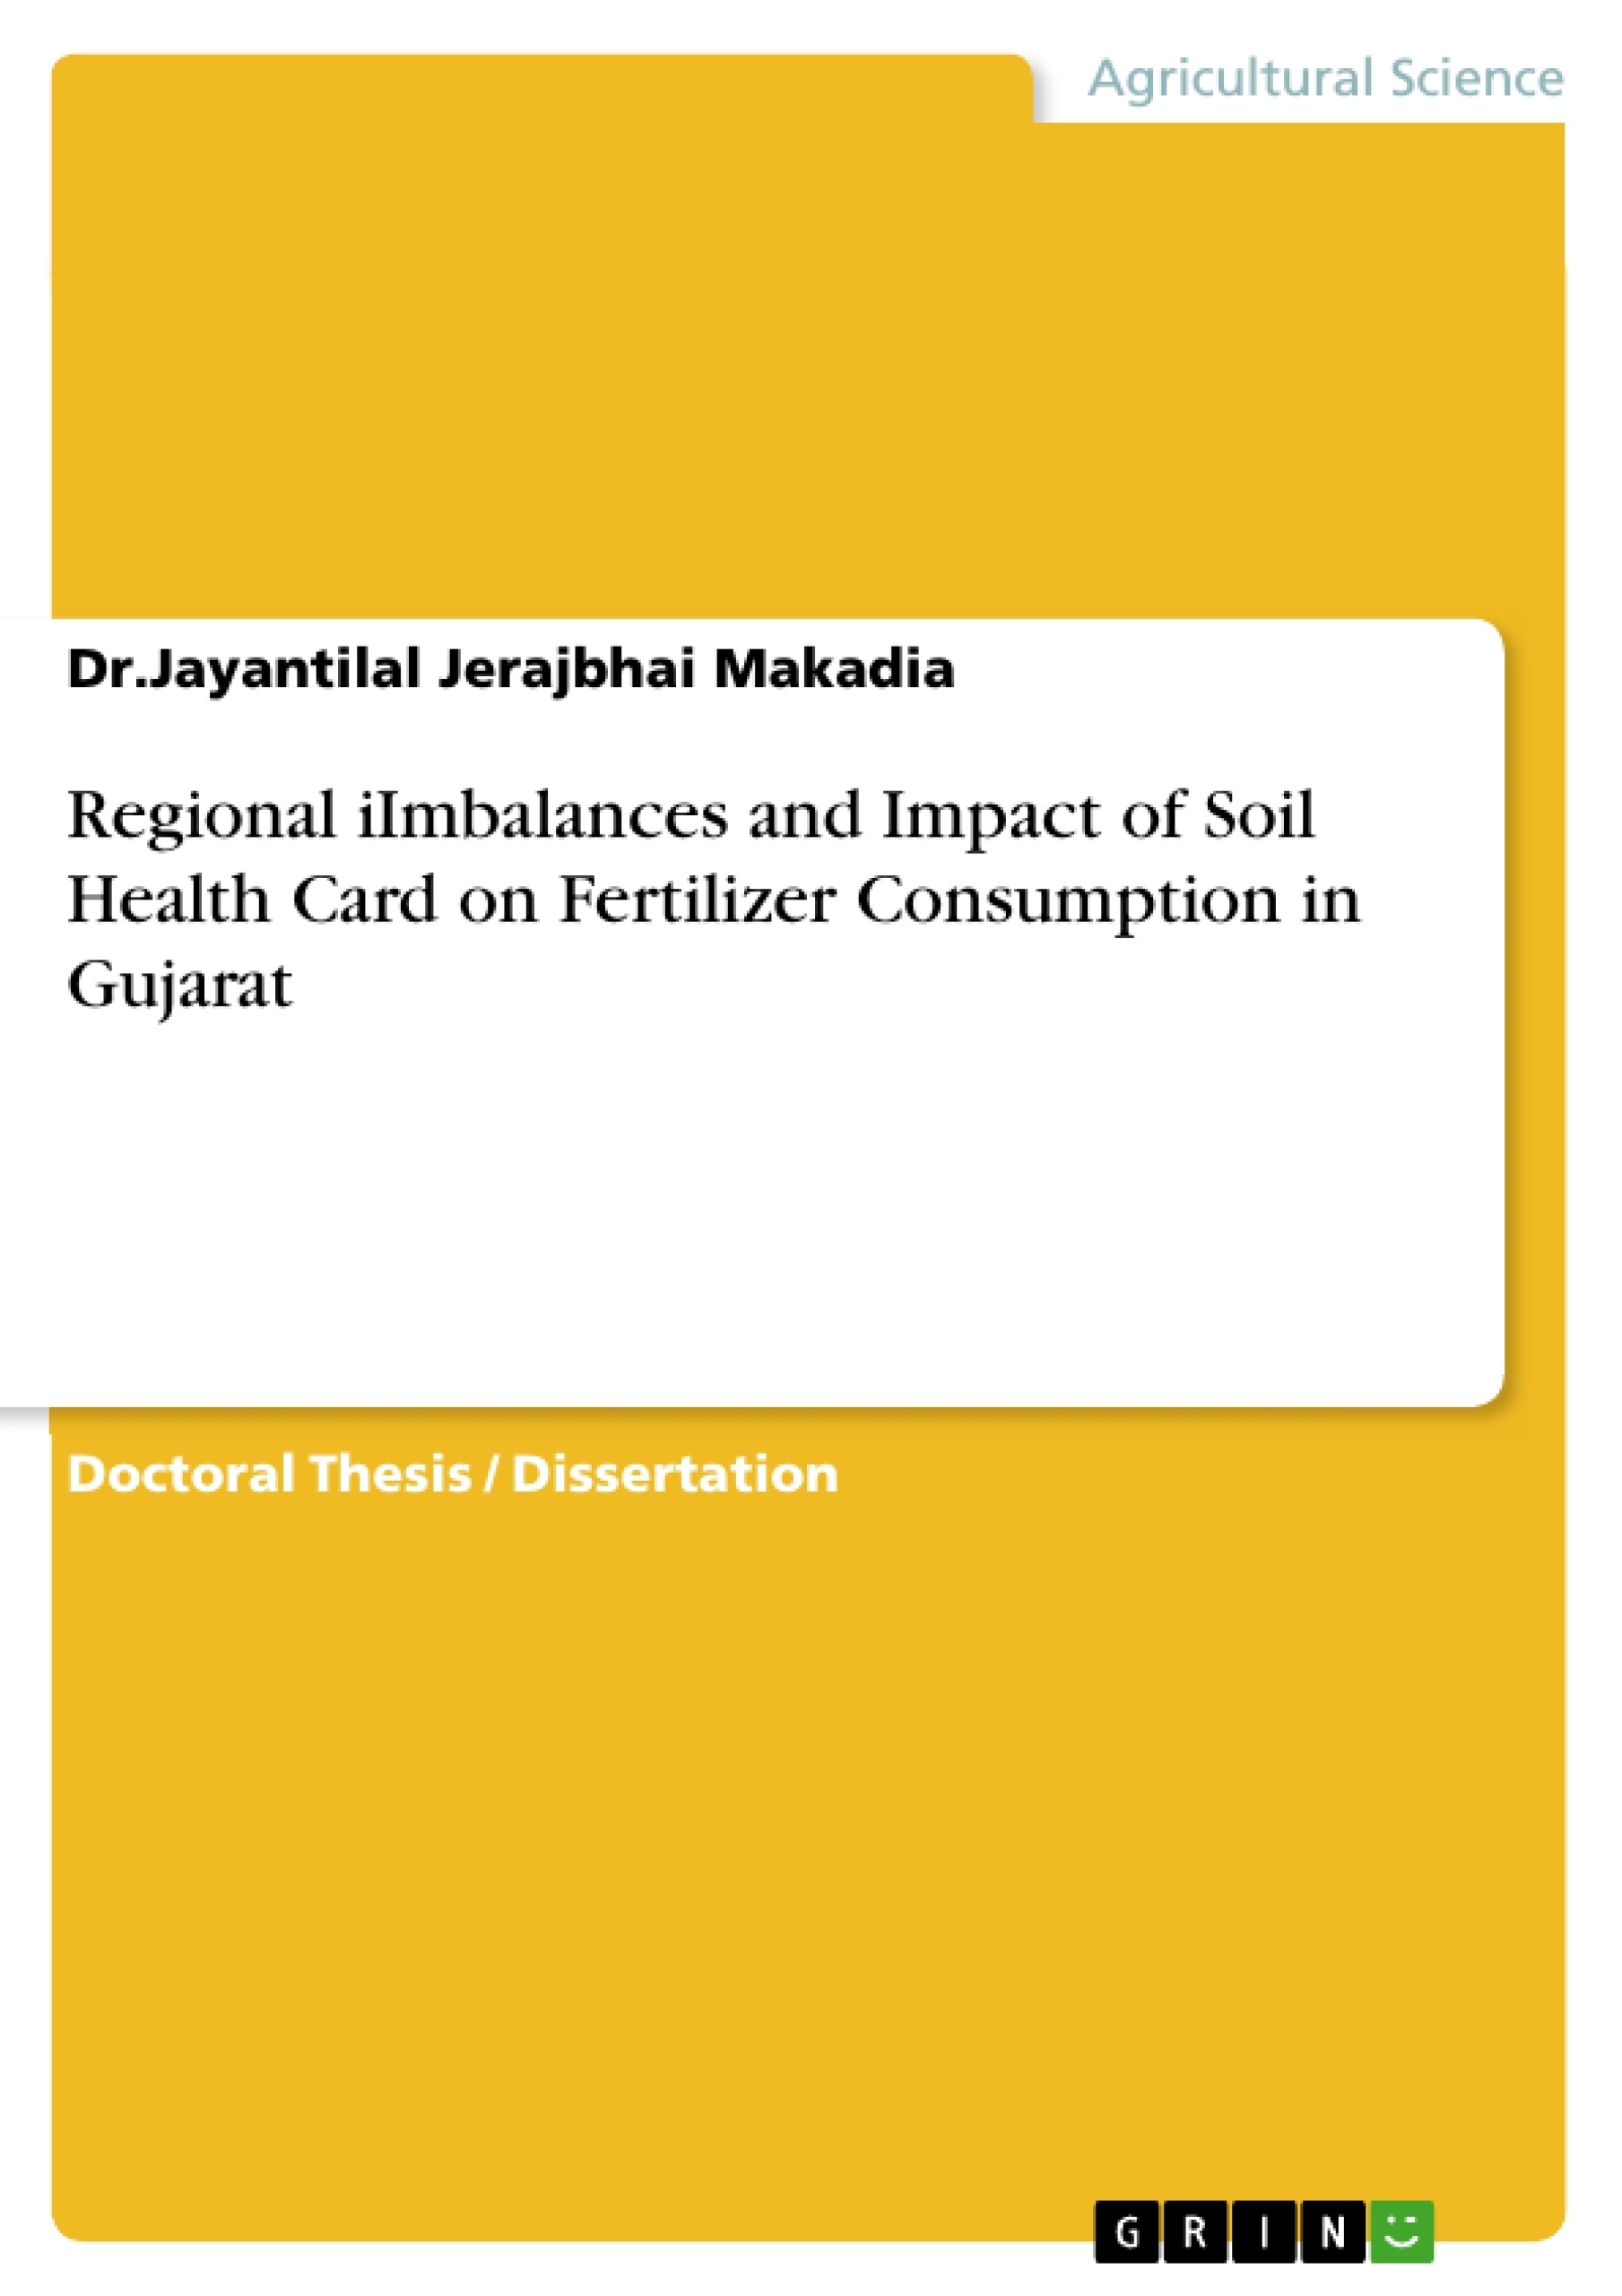 Title: Regional iImbalances and Impact of Soil Health Card on Fertilizer Consumption in Gujarat